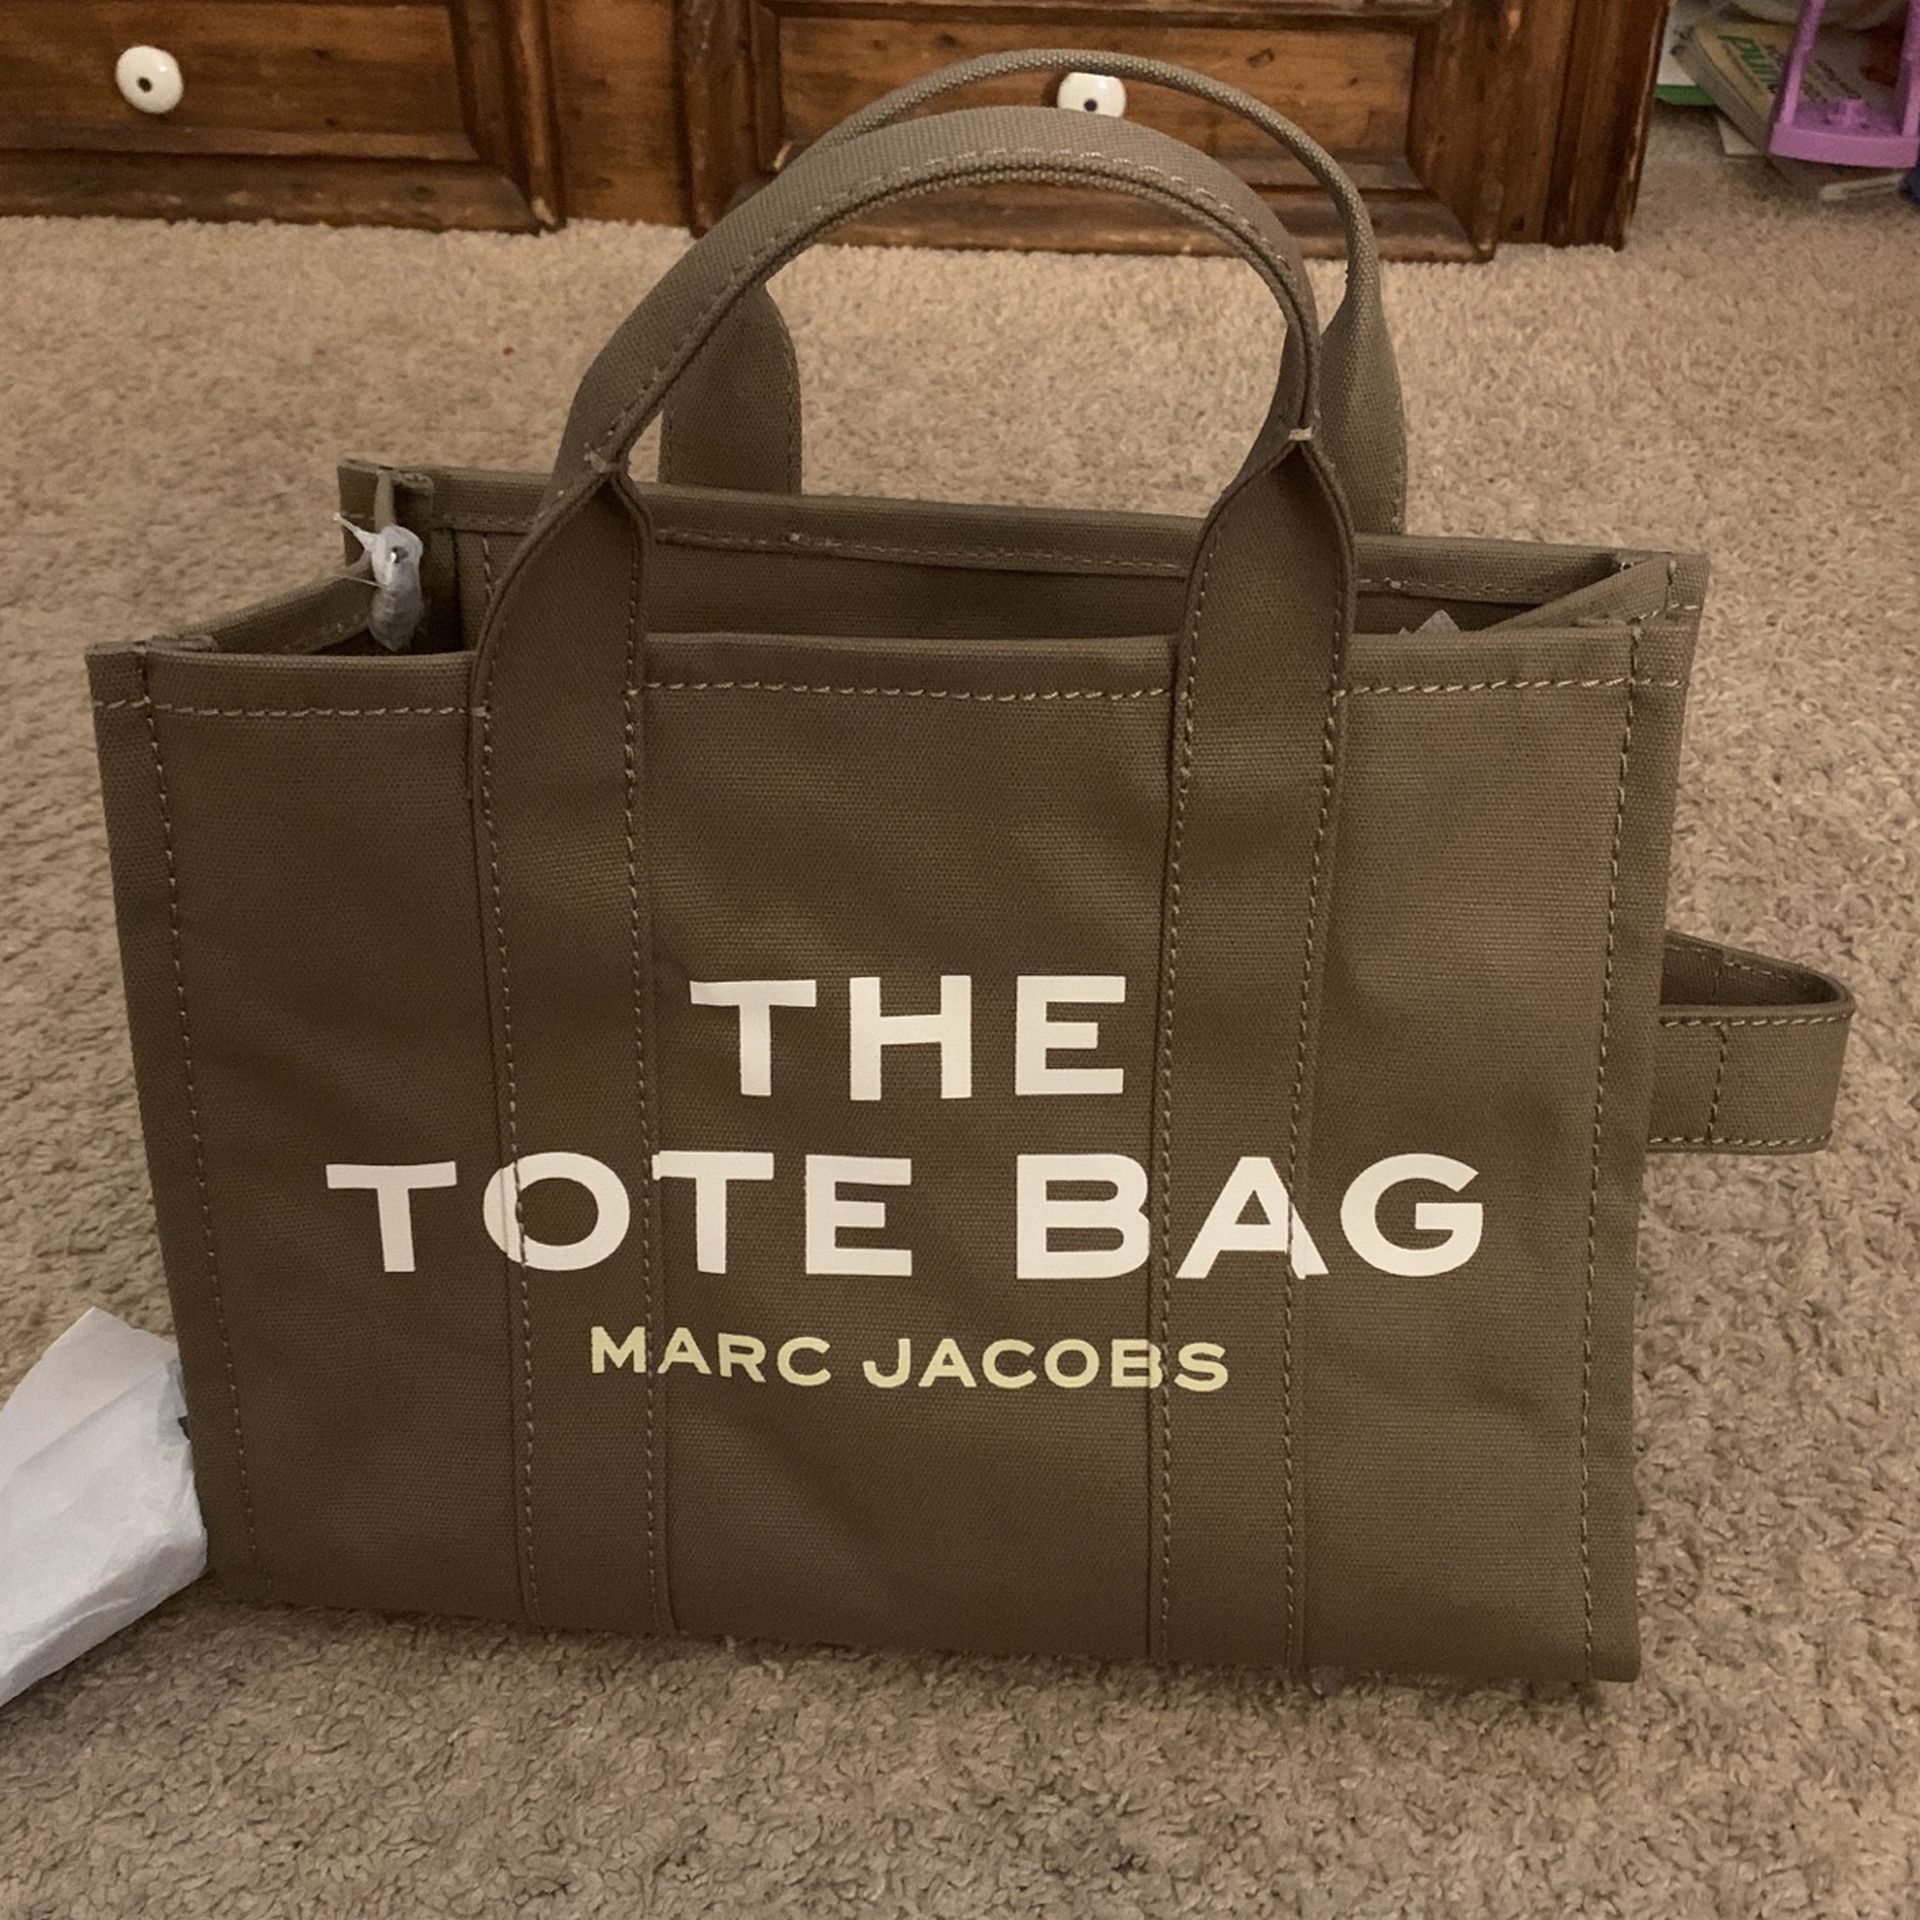 The Tote bag Marc jacobs.  